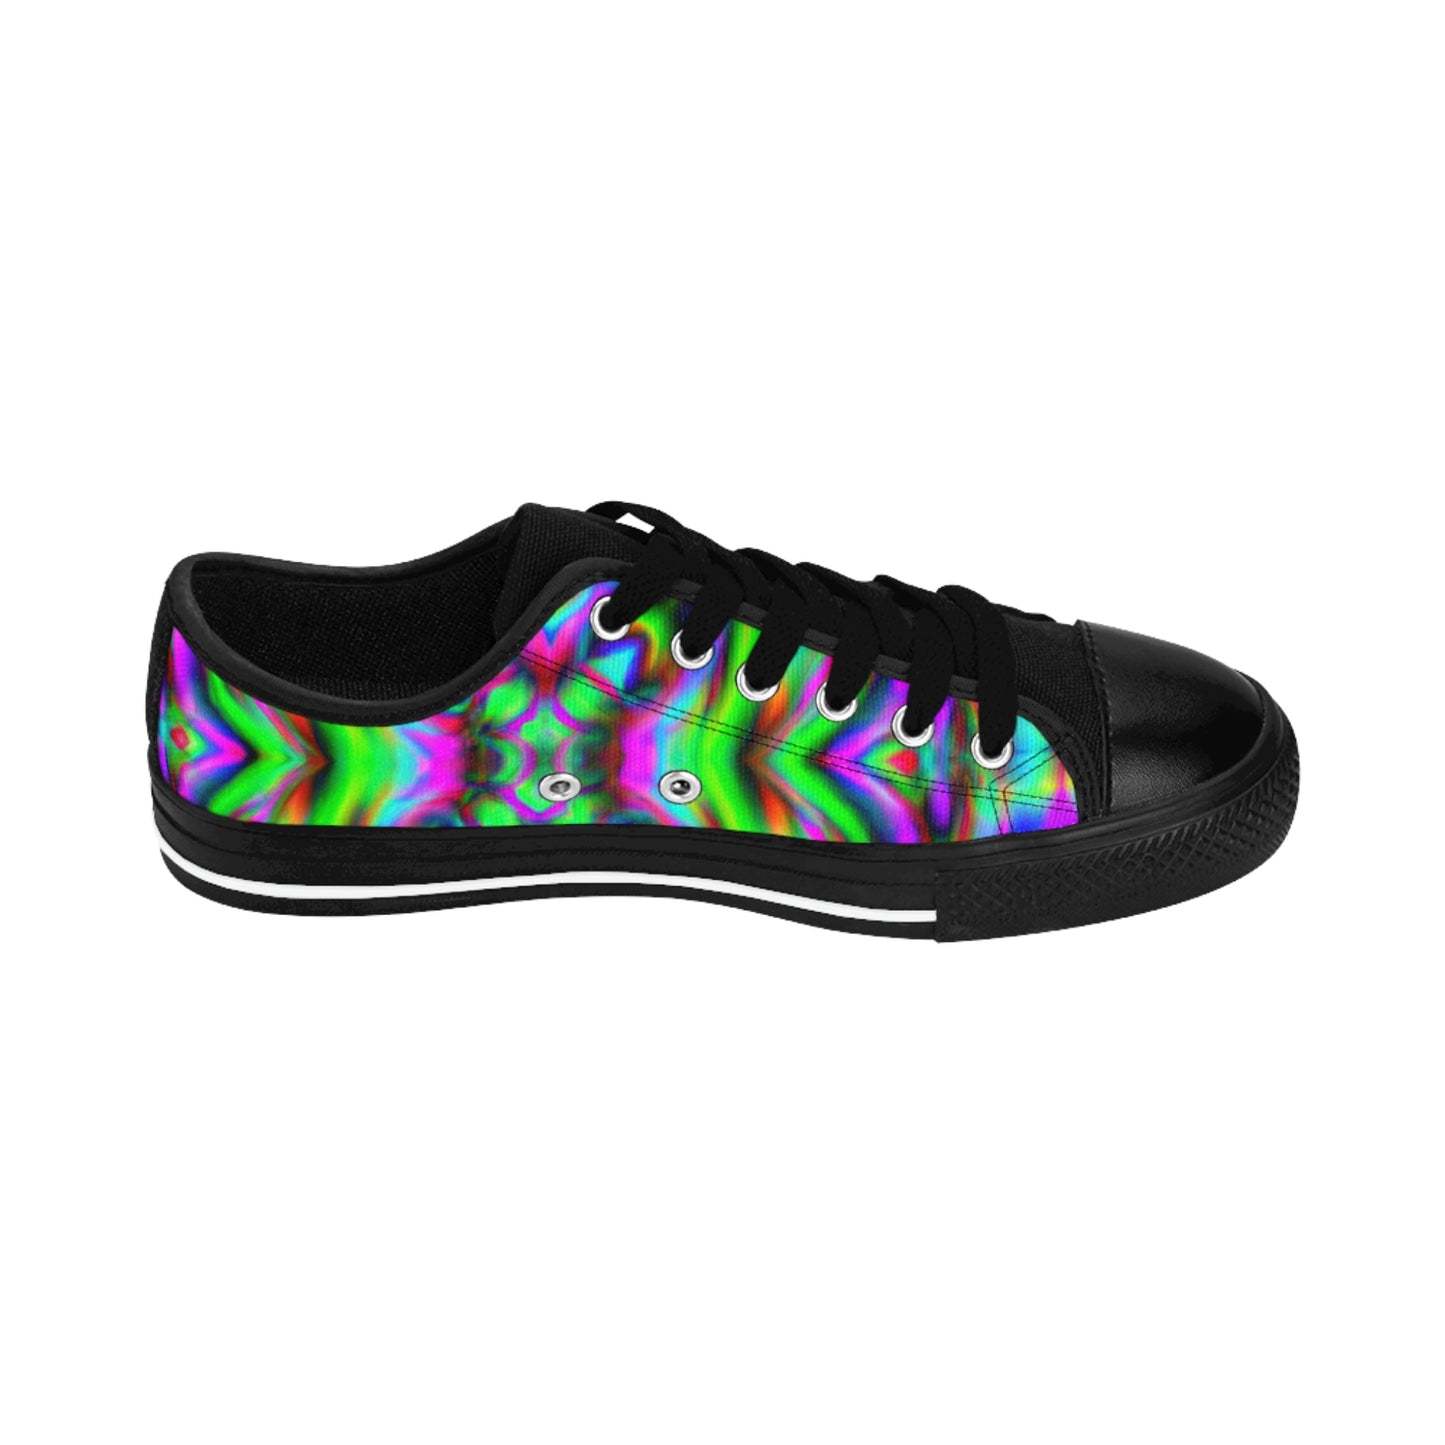 Giles Footstitcher - Psychedelic Low Top